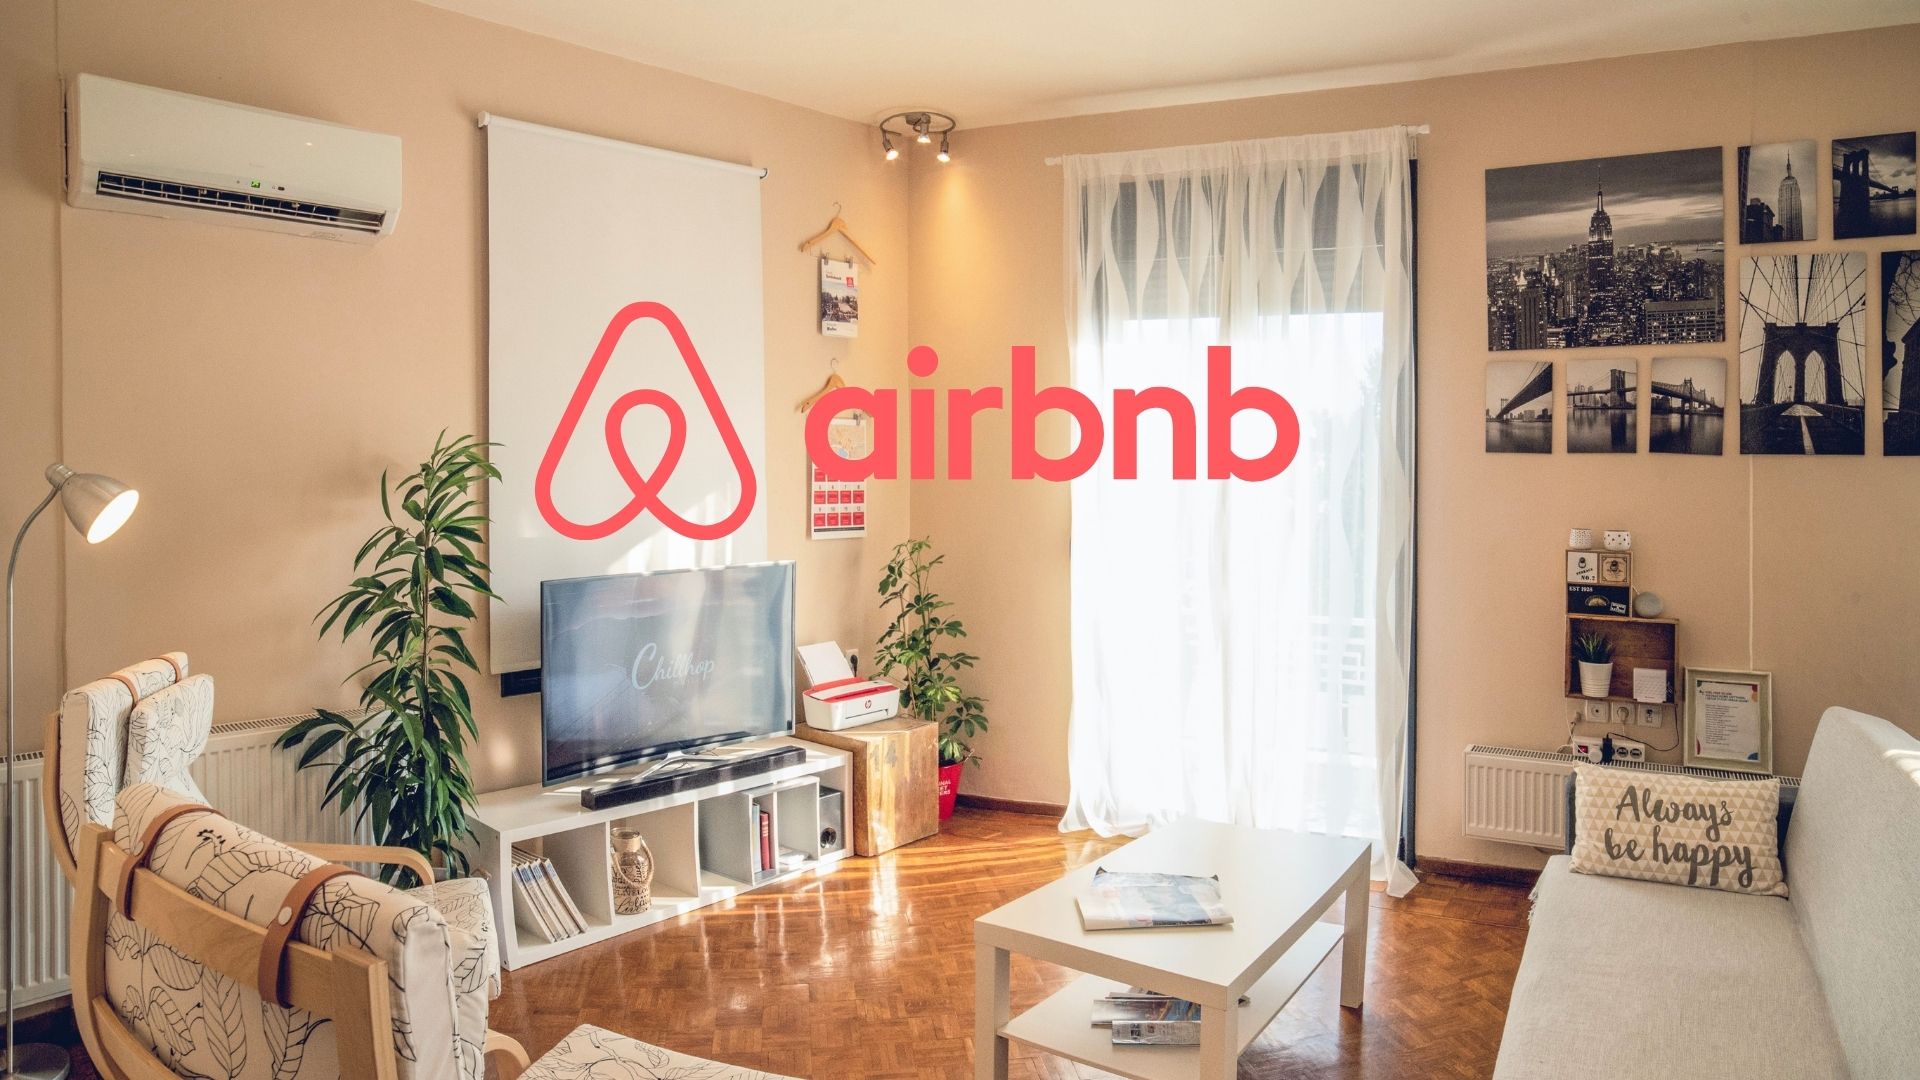 The Next Big Change Of Airbnb